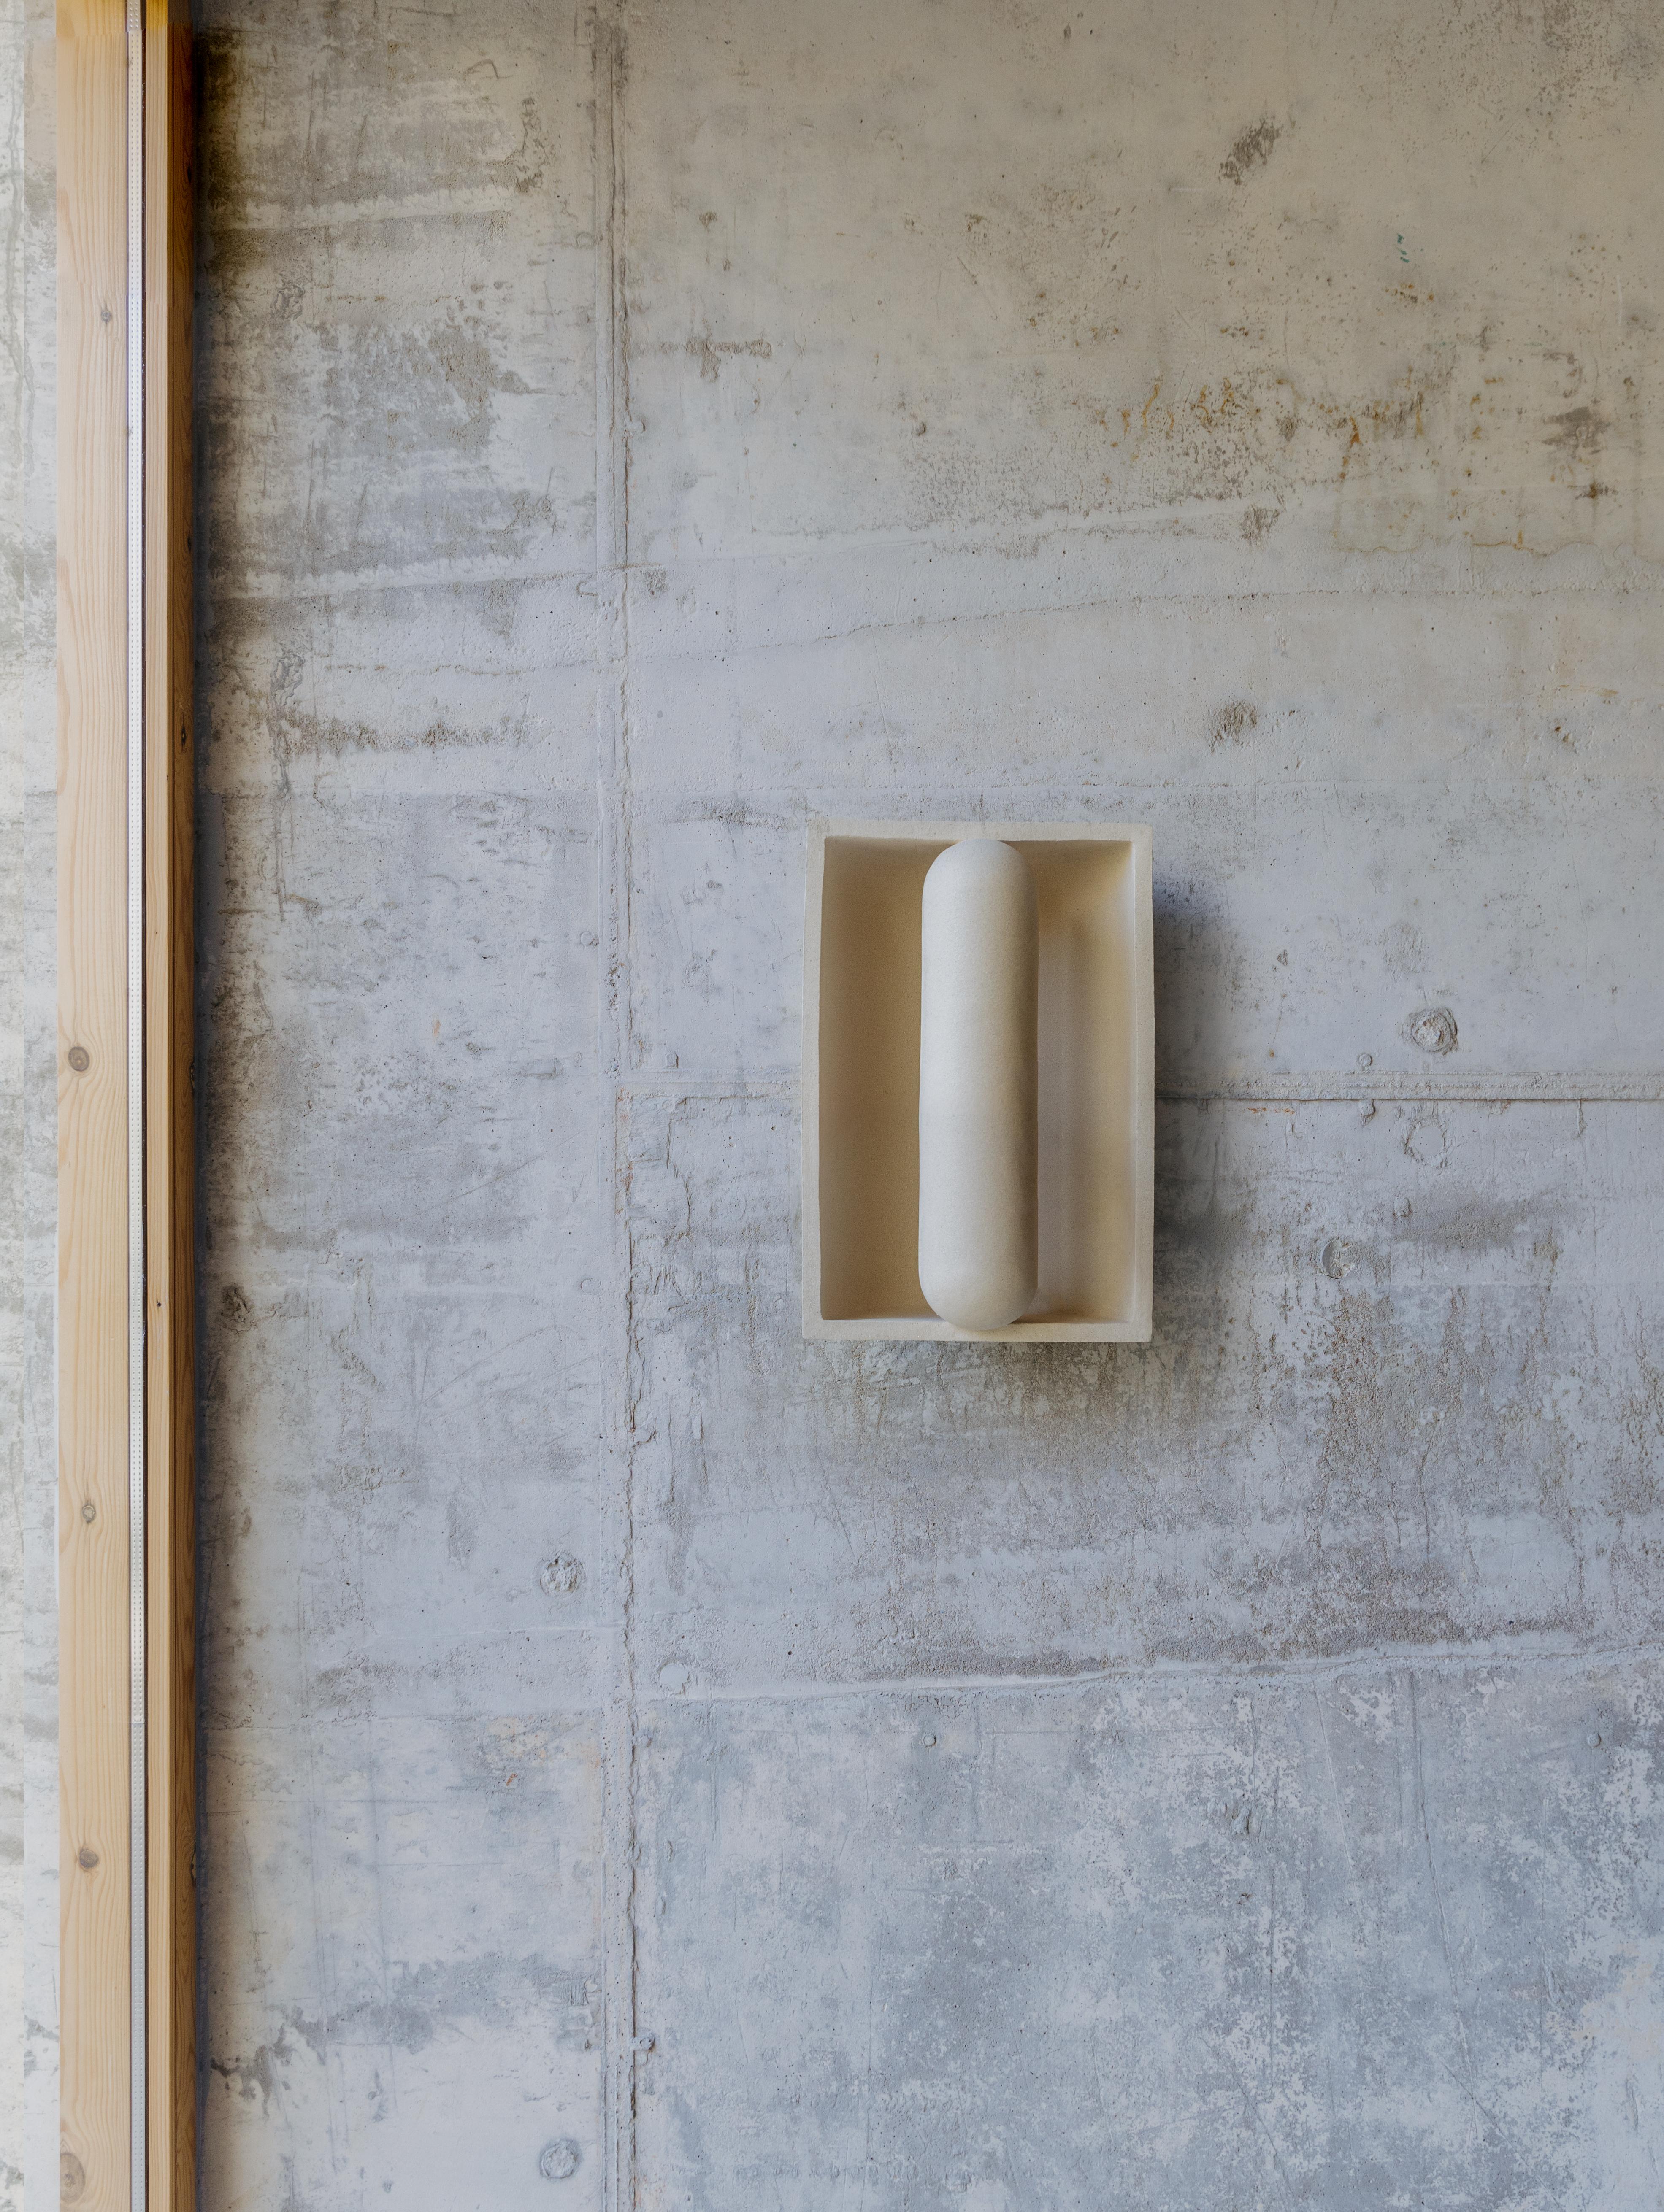 Kyrtos wall light by Lisa Allegra
Dimensions: W 22.5 x D 17,5 x H 33,5 cm
Materials: Clay

Born in 1986 in Paris, Lisa Allegra has earned in 2010 a degree in furniture design from the École Supérieure des Arts Décoratifs. She has worked for Tsé&Tsé